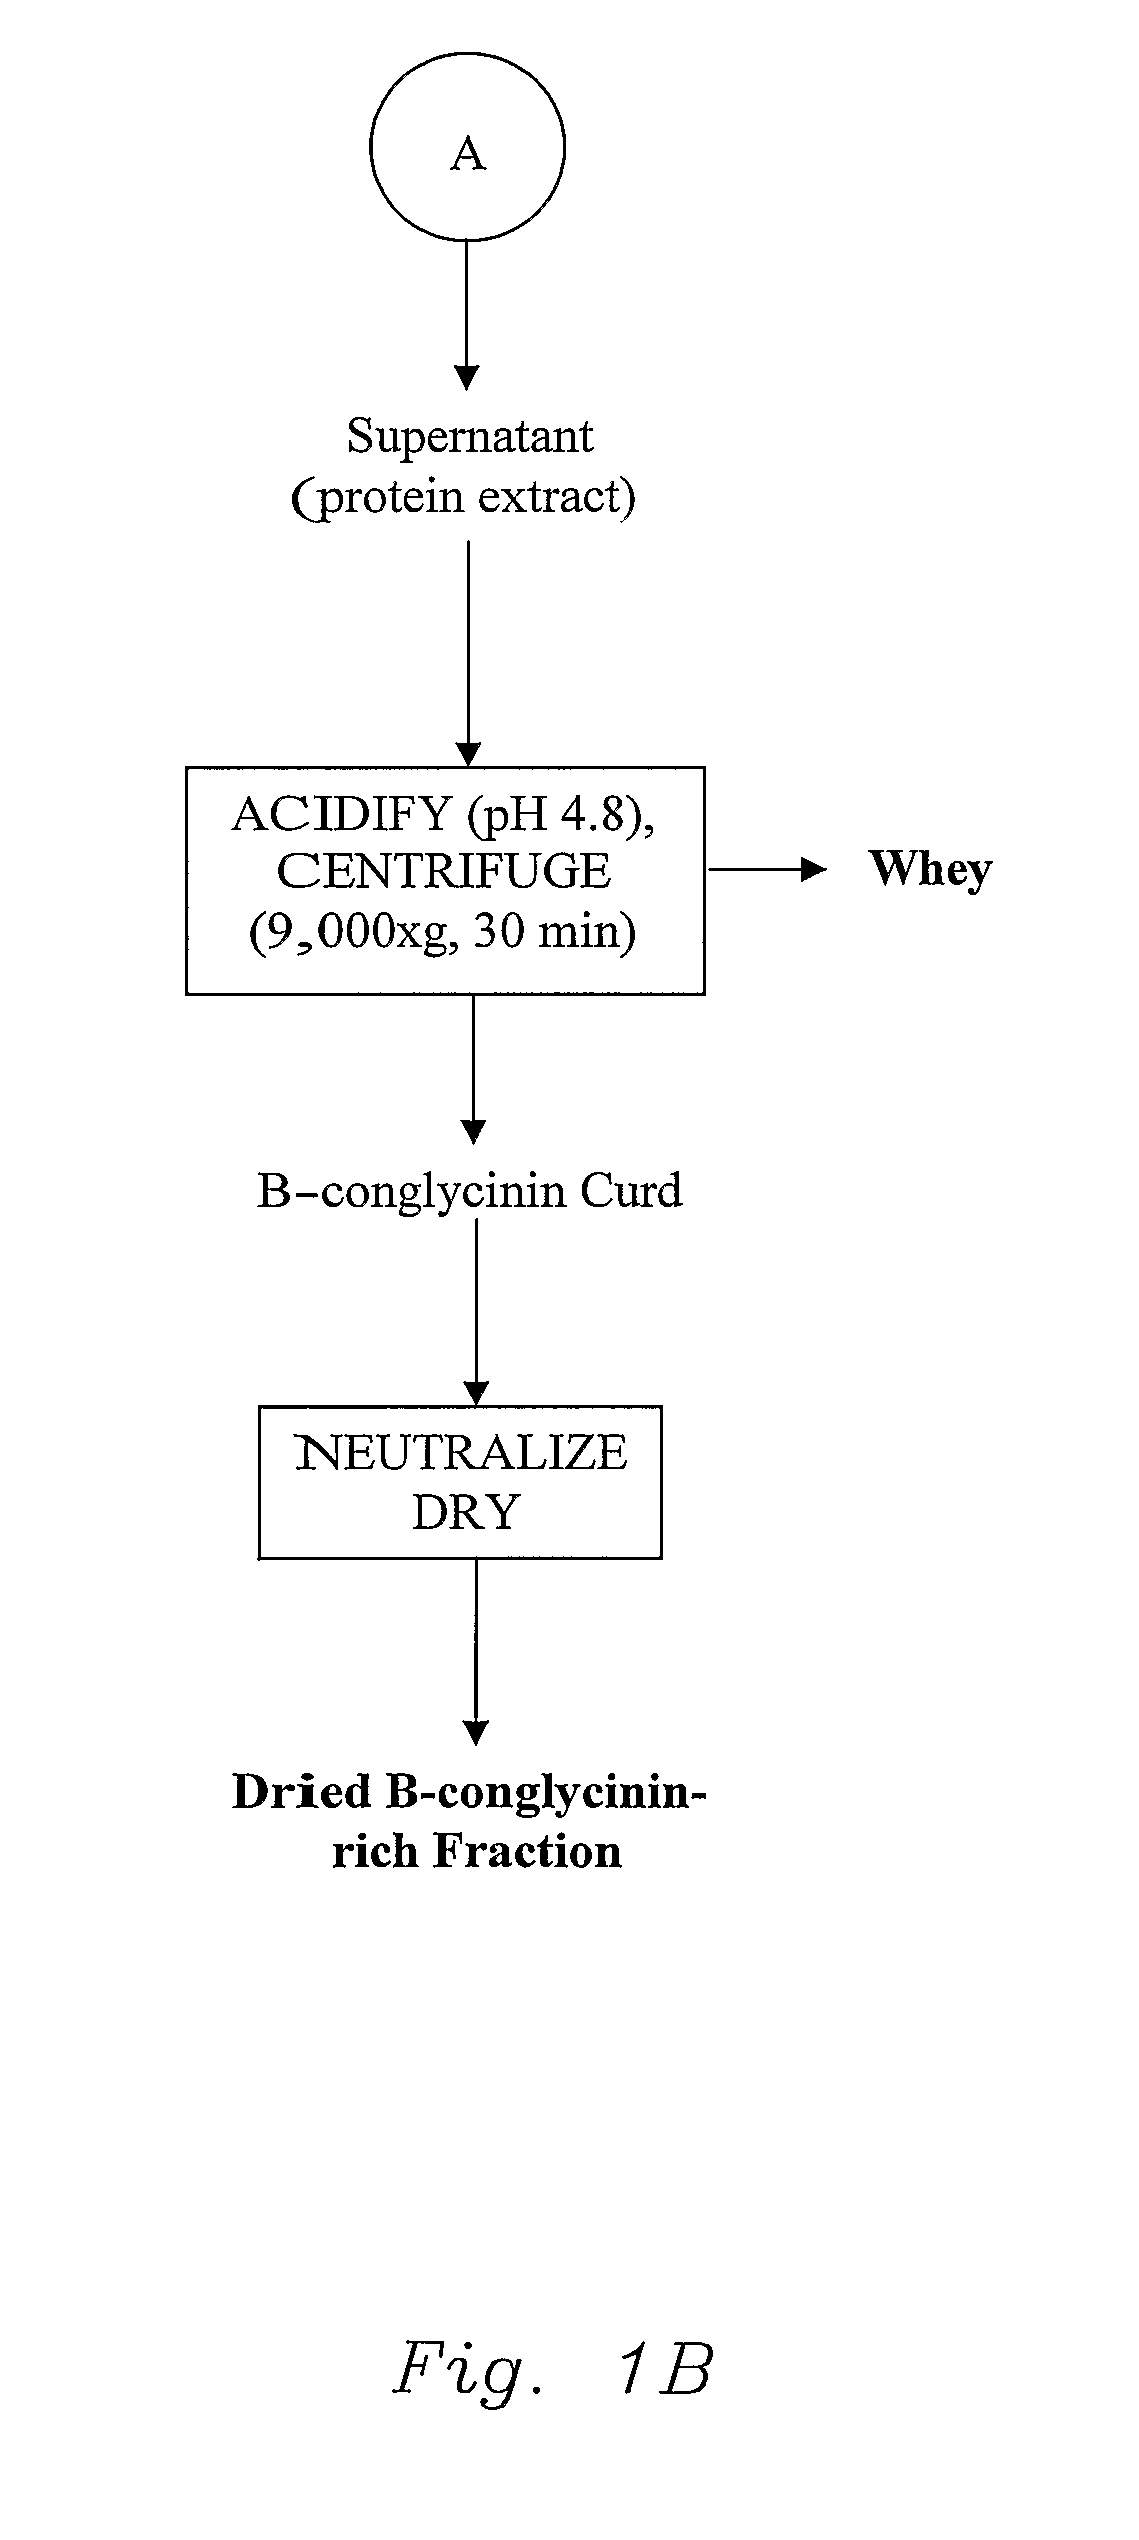 Vegetable protein fractionization process and compositions